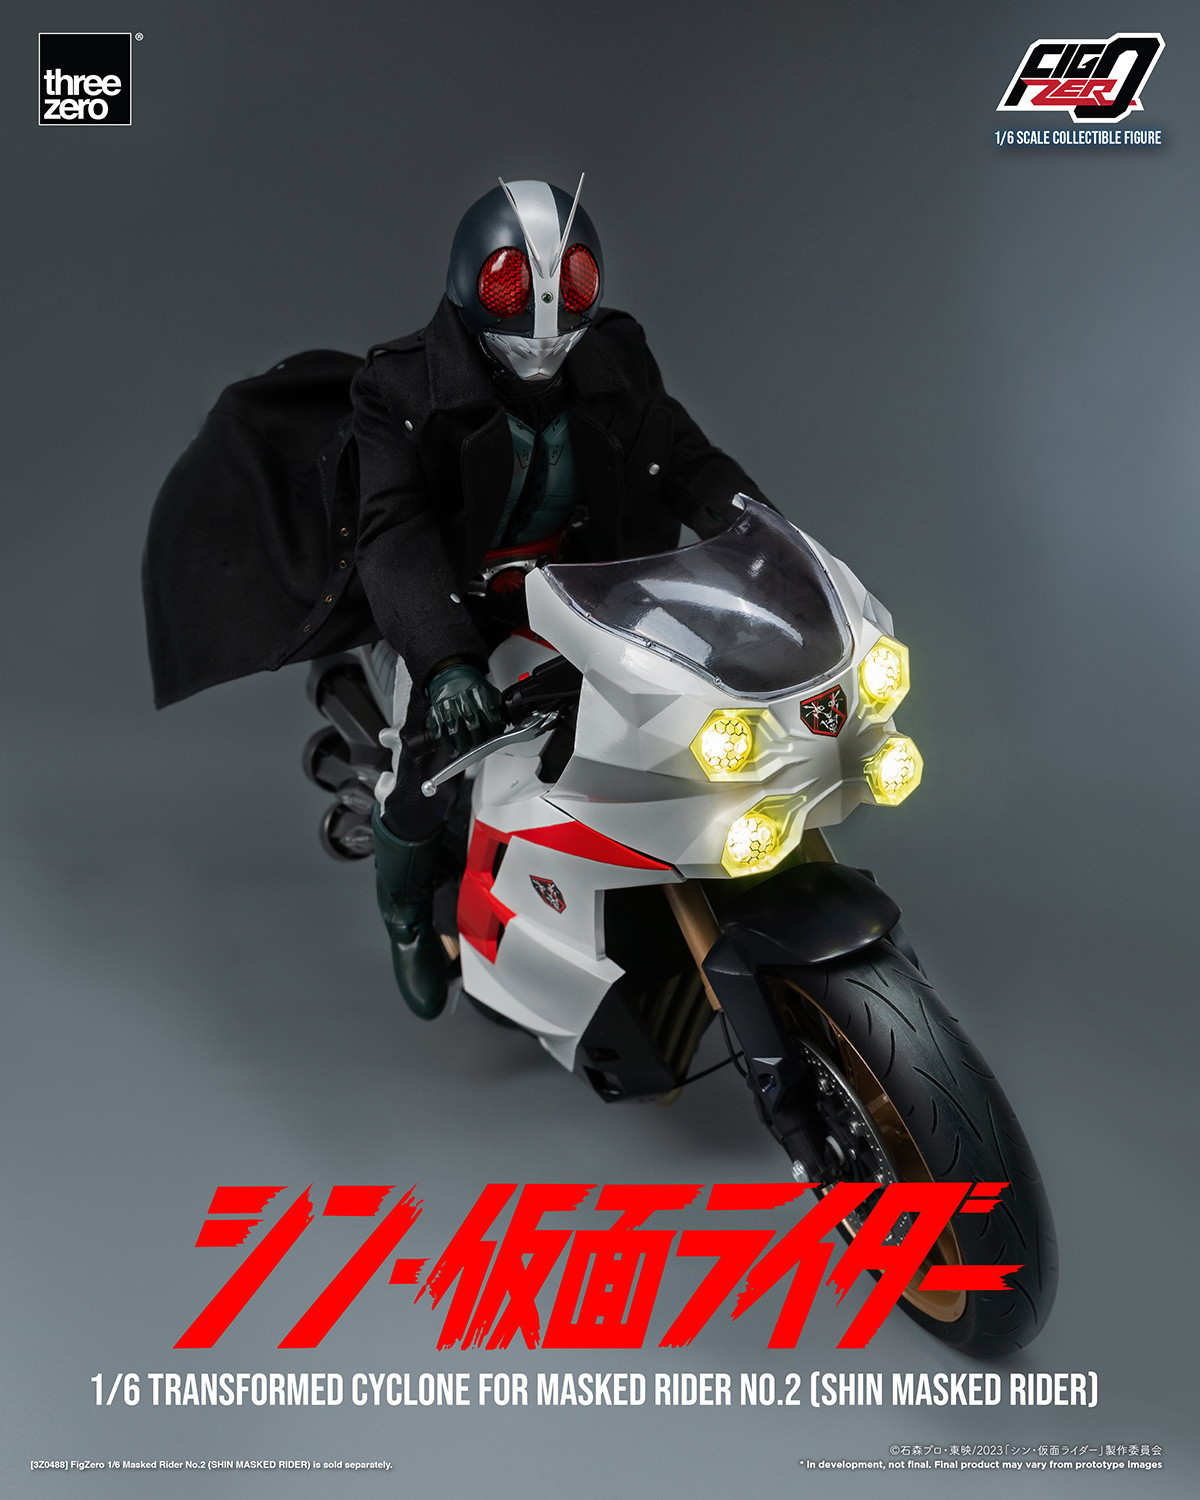 Transformed Cyclone for Masked Rider No. 2 (Shin Masked Rider) (Prototype Shown) View 13